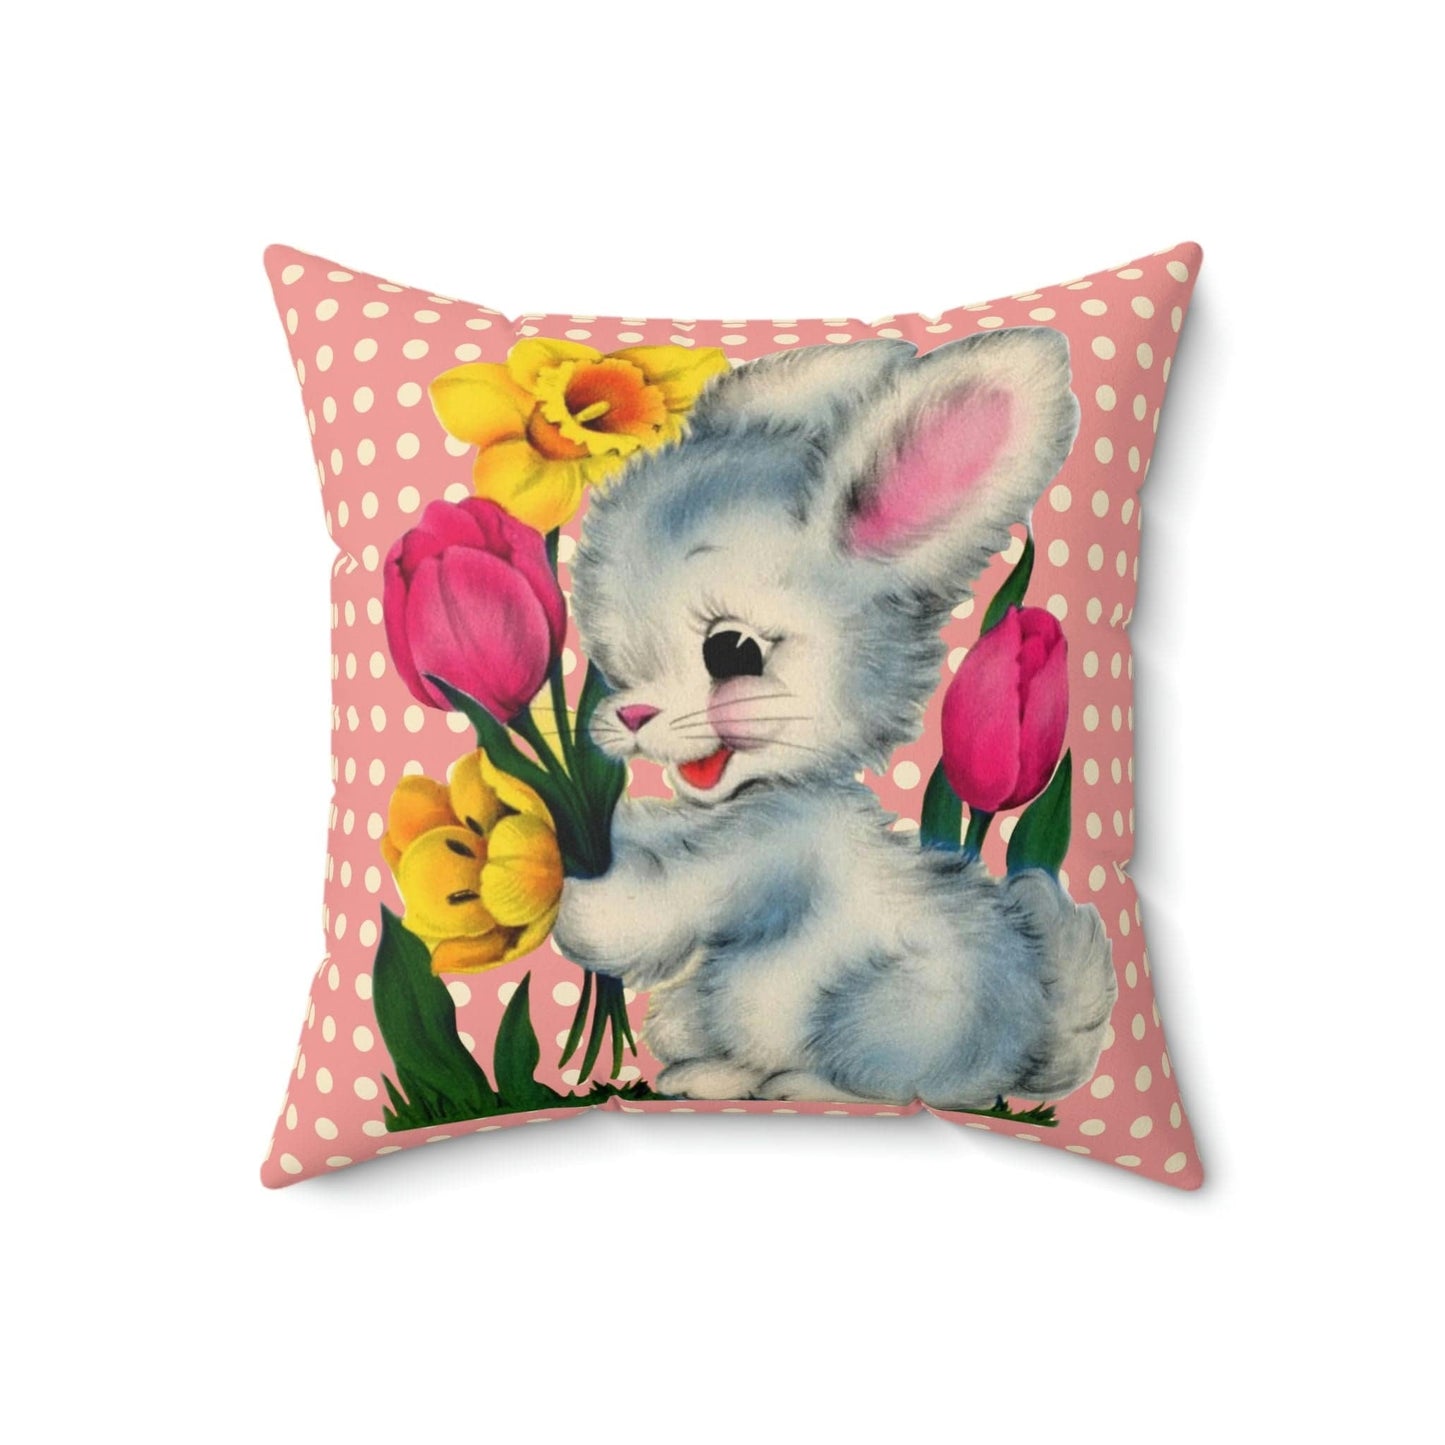 Kate McEnroe New York Vintage Kitschy Easter Bunny Throw Pillow Cover Throw Pillow Covers